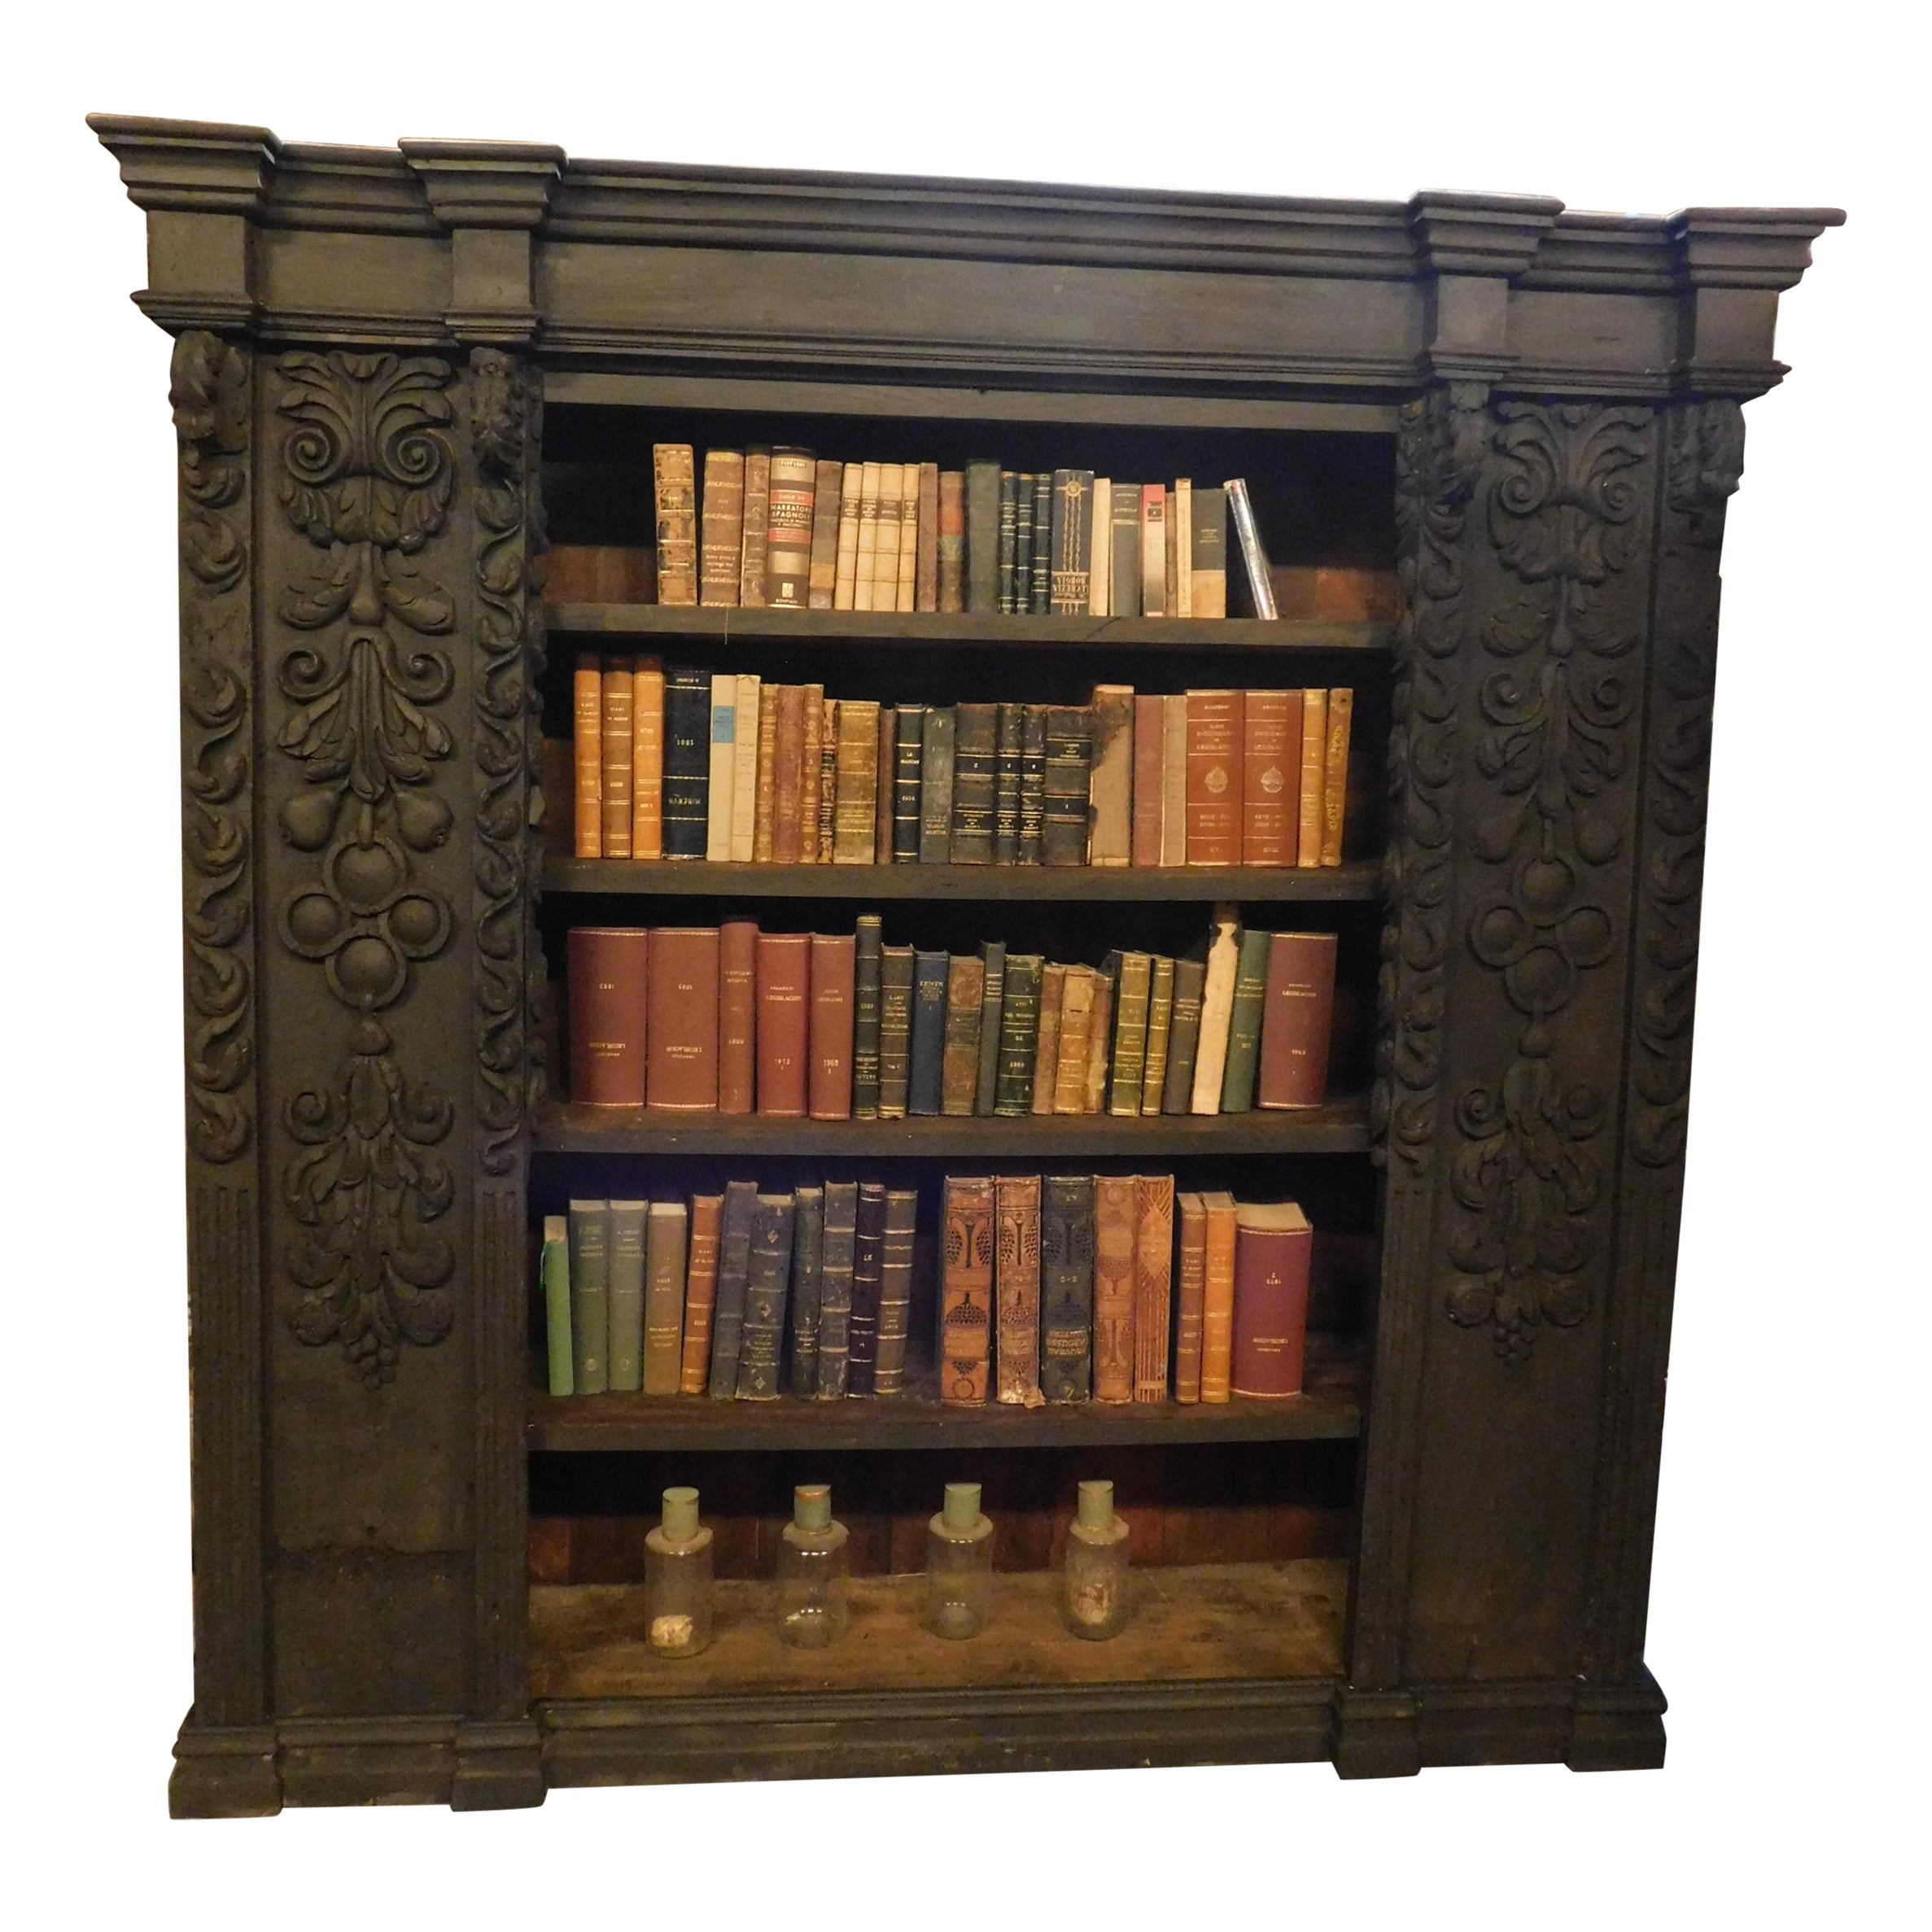 Antique Lacquered and Carved Wooden Bookcase, 16th Century, Spain